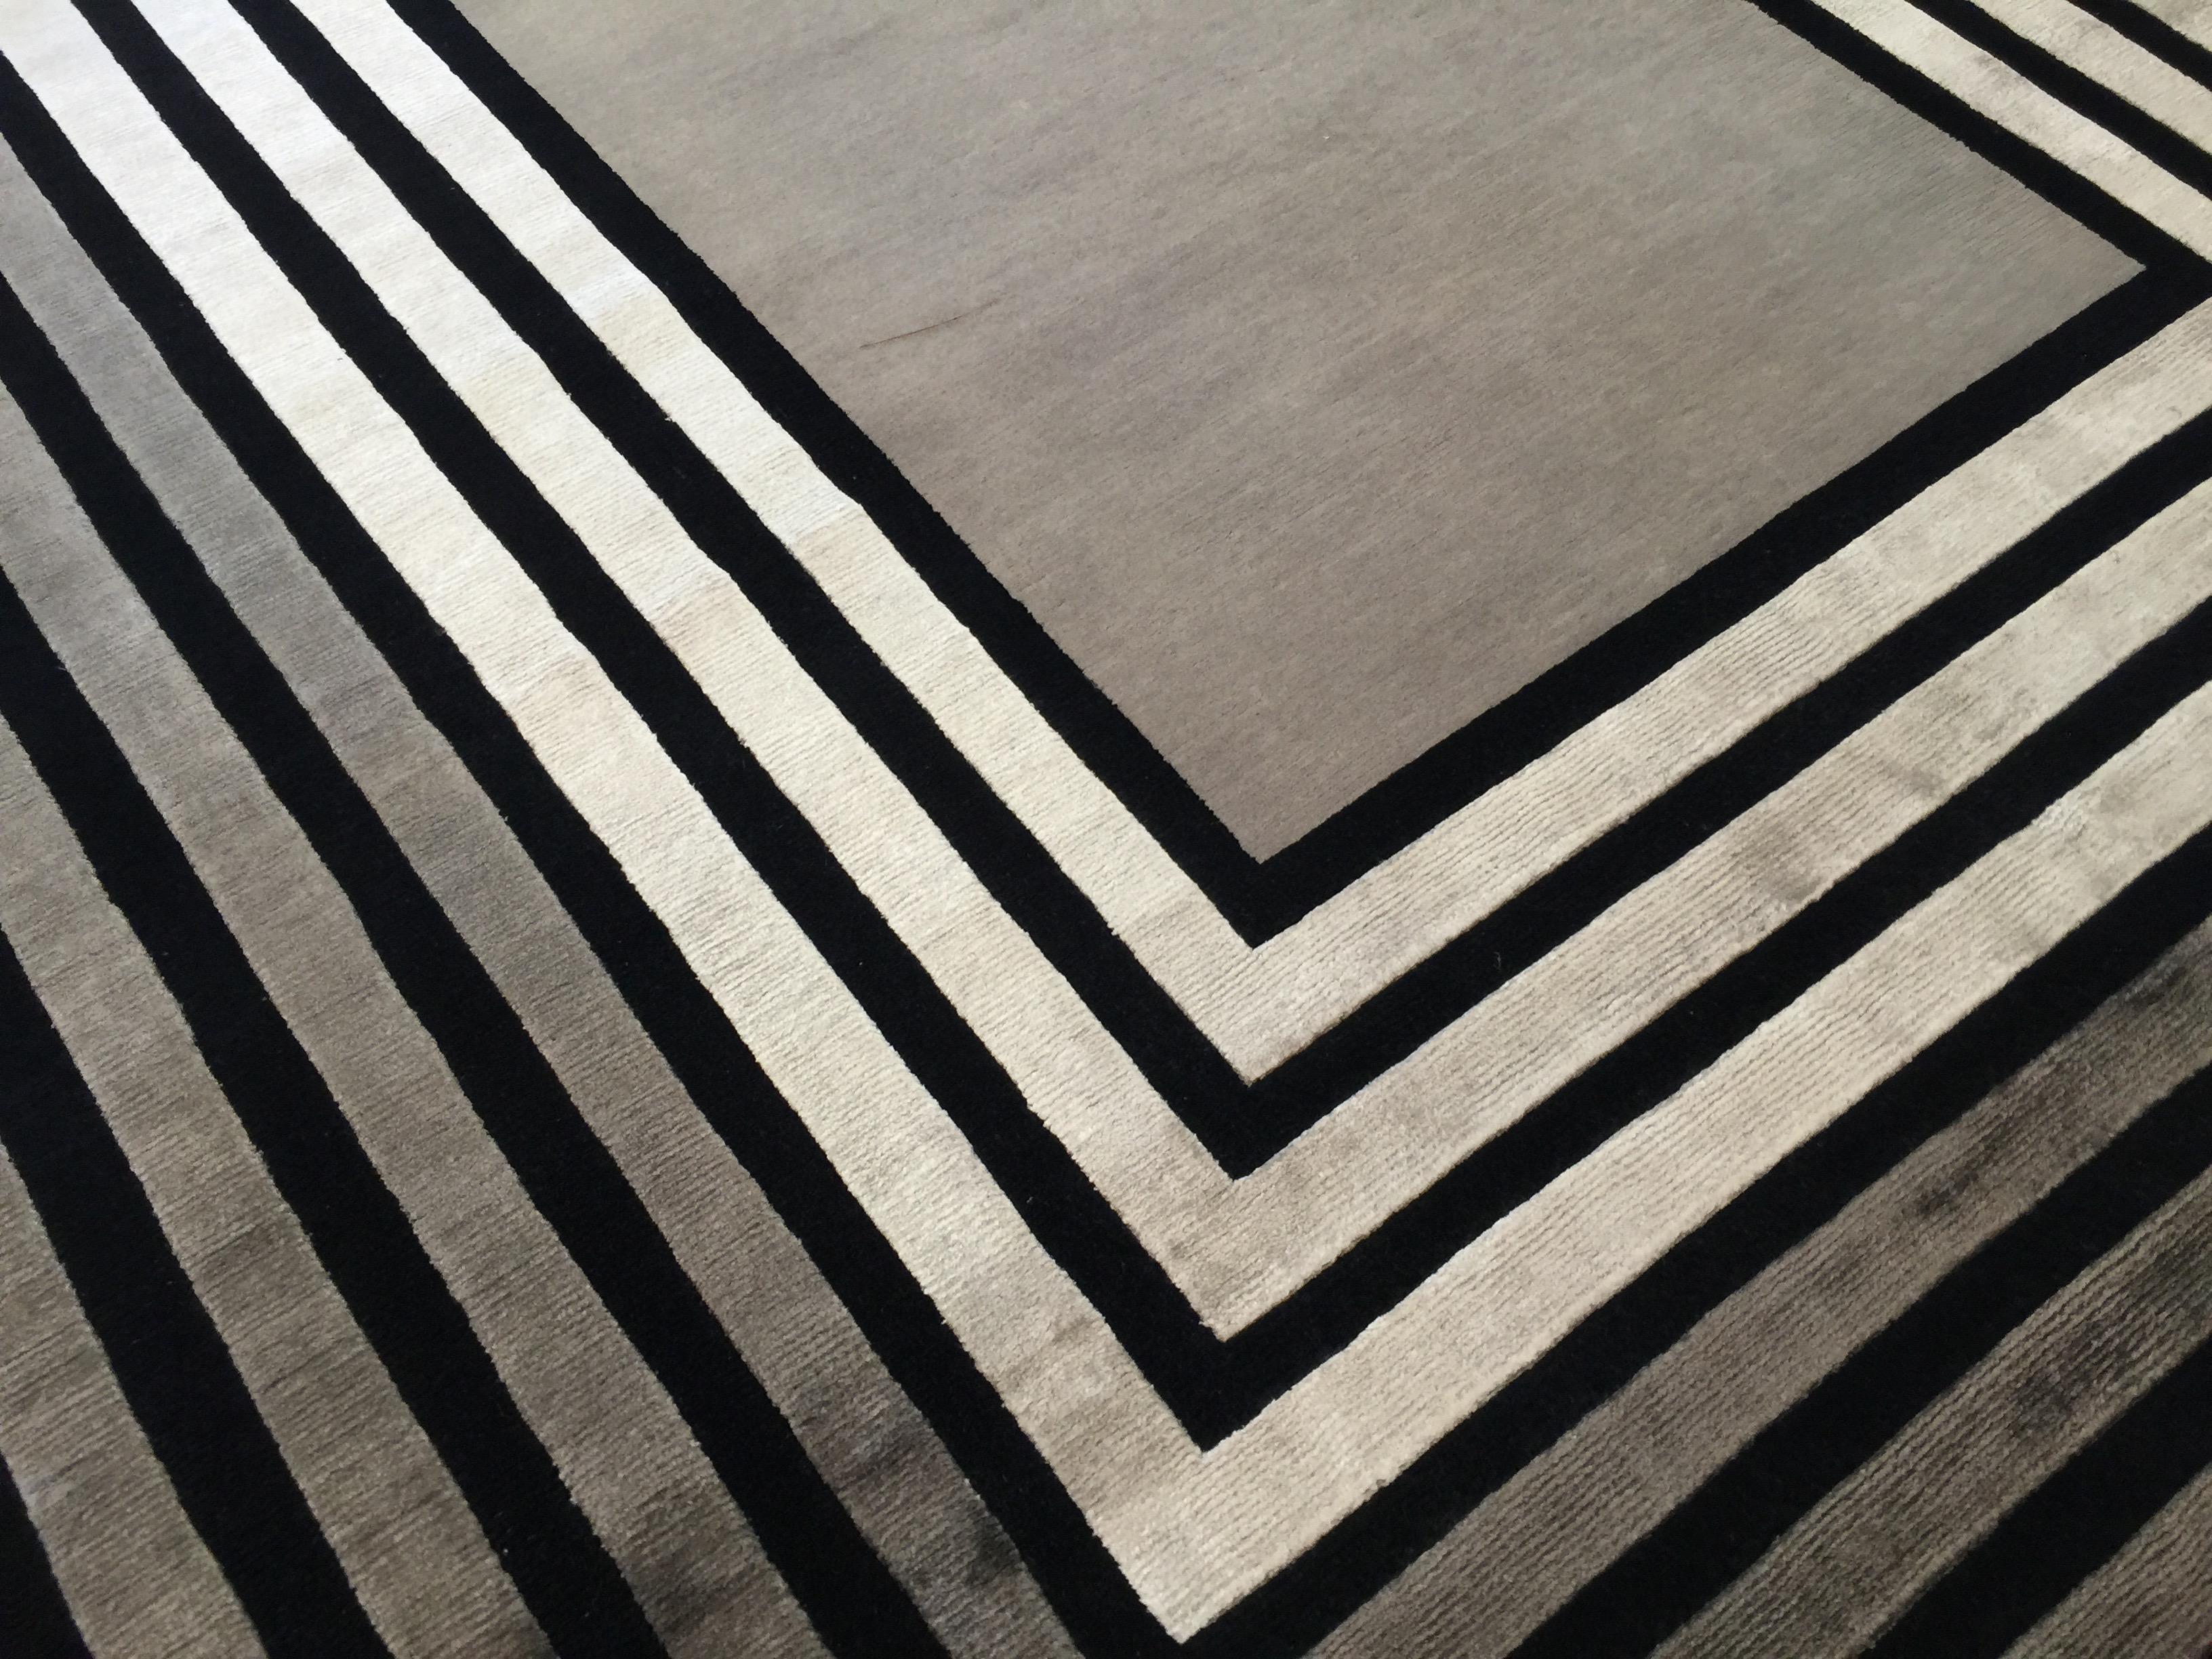 Seven concentric rectangles define a very elegant and strong design able to clearly define the area where the rug is placed.
This rug is hand knotted in Nepal by our artisans by using 20% silk and 80% fine Himalayan wool dyed using vegetable and